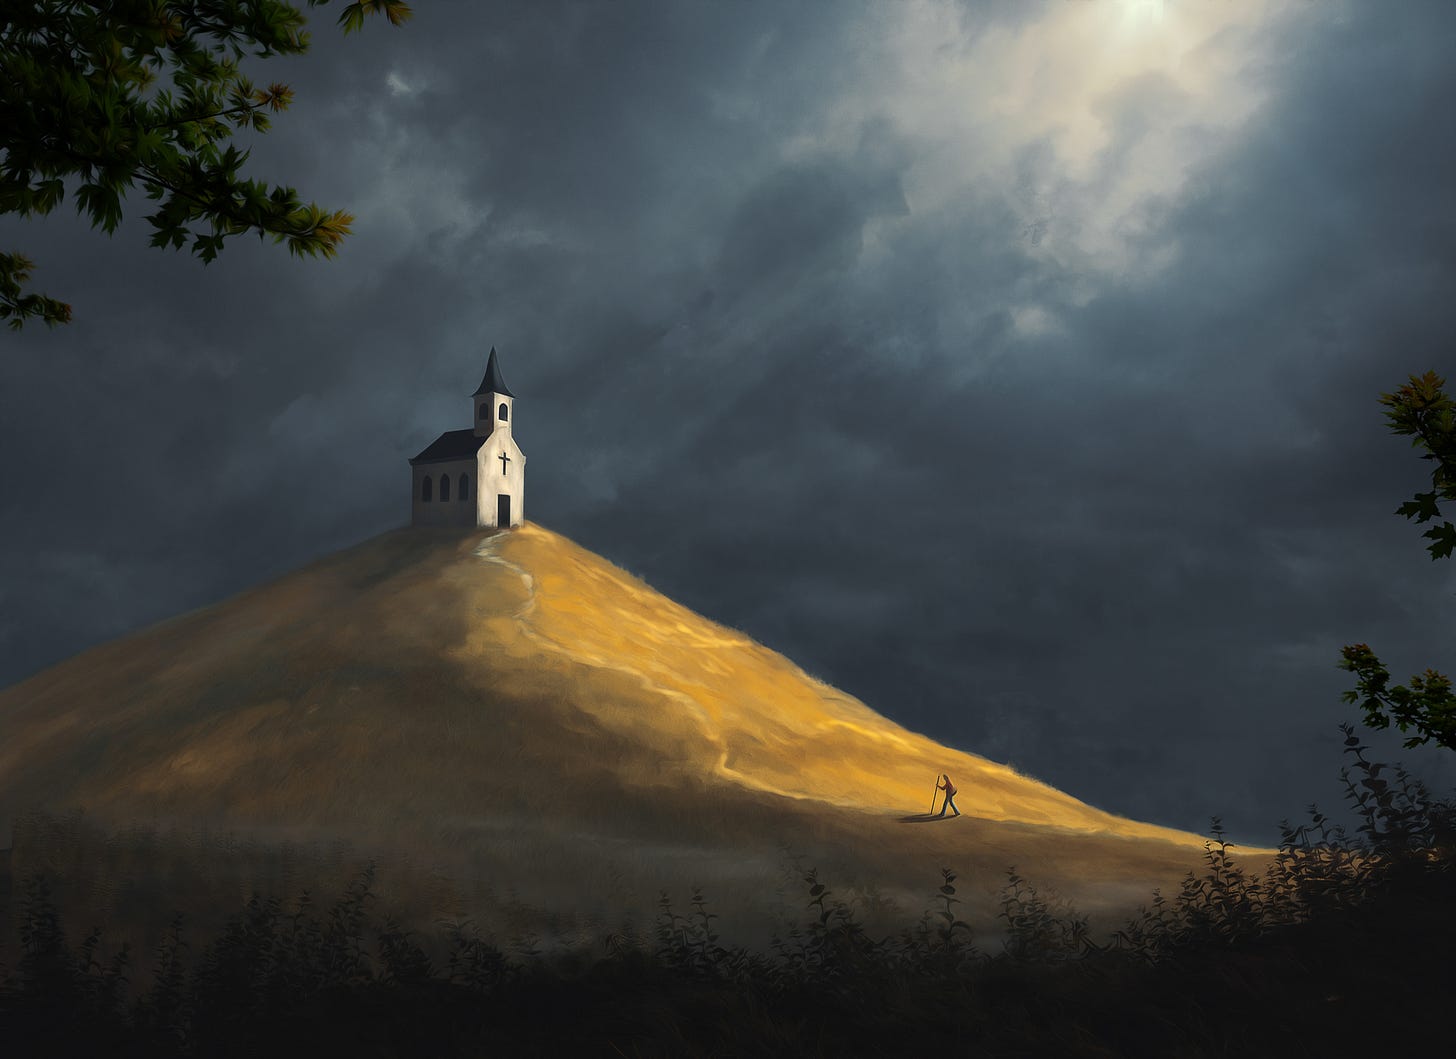 Moody painting of a church on a hill